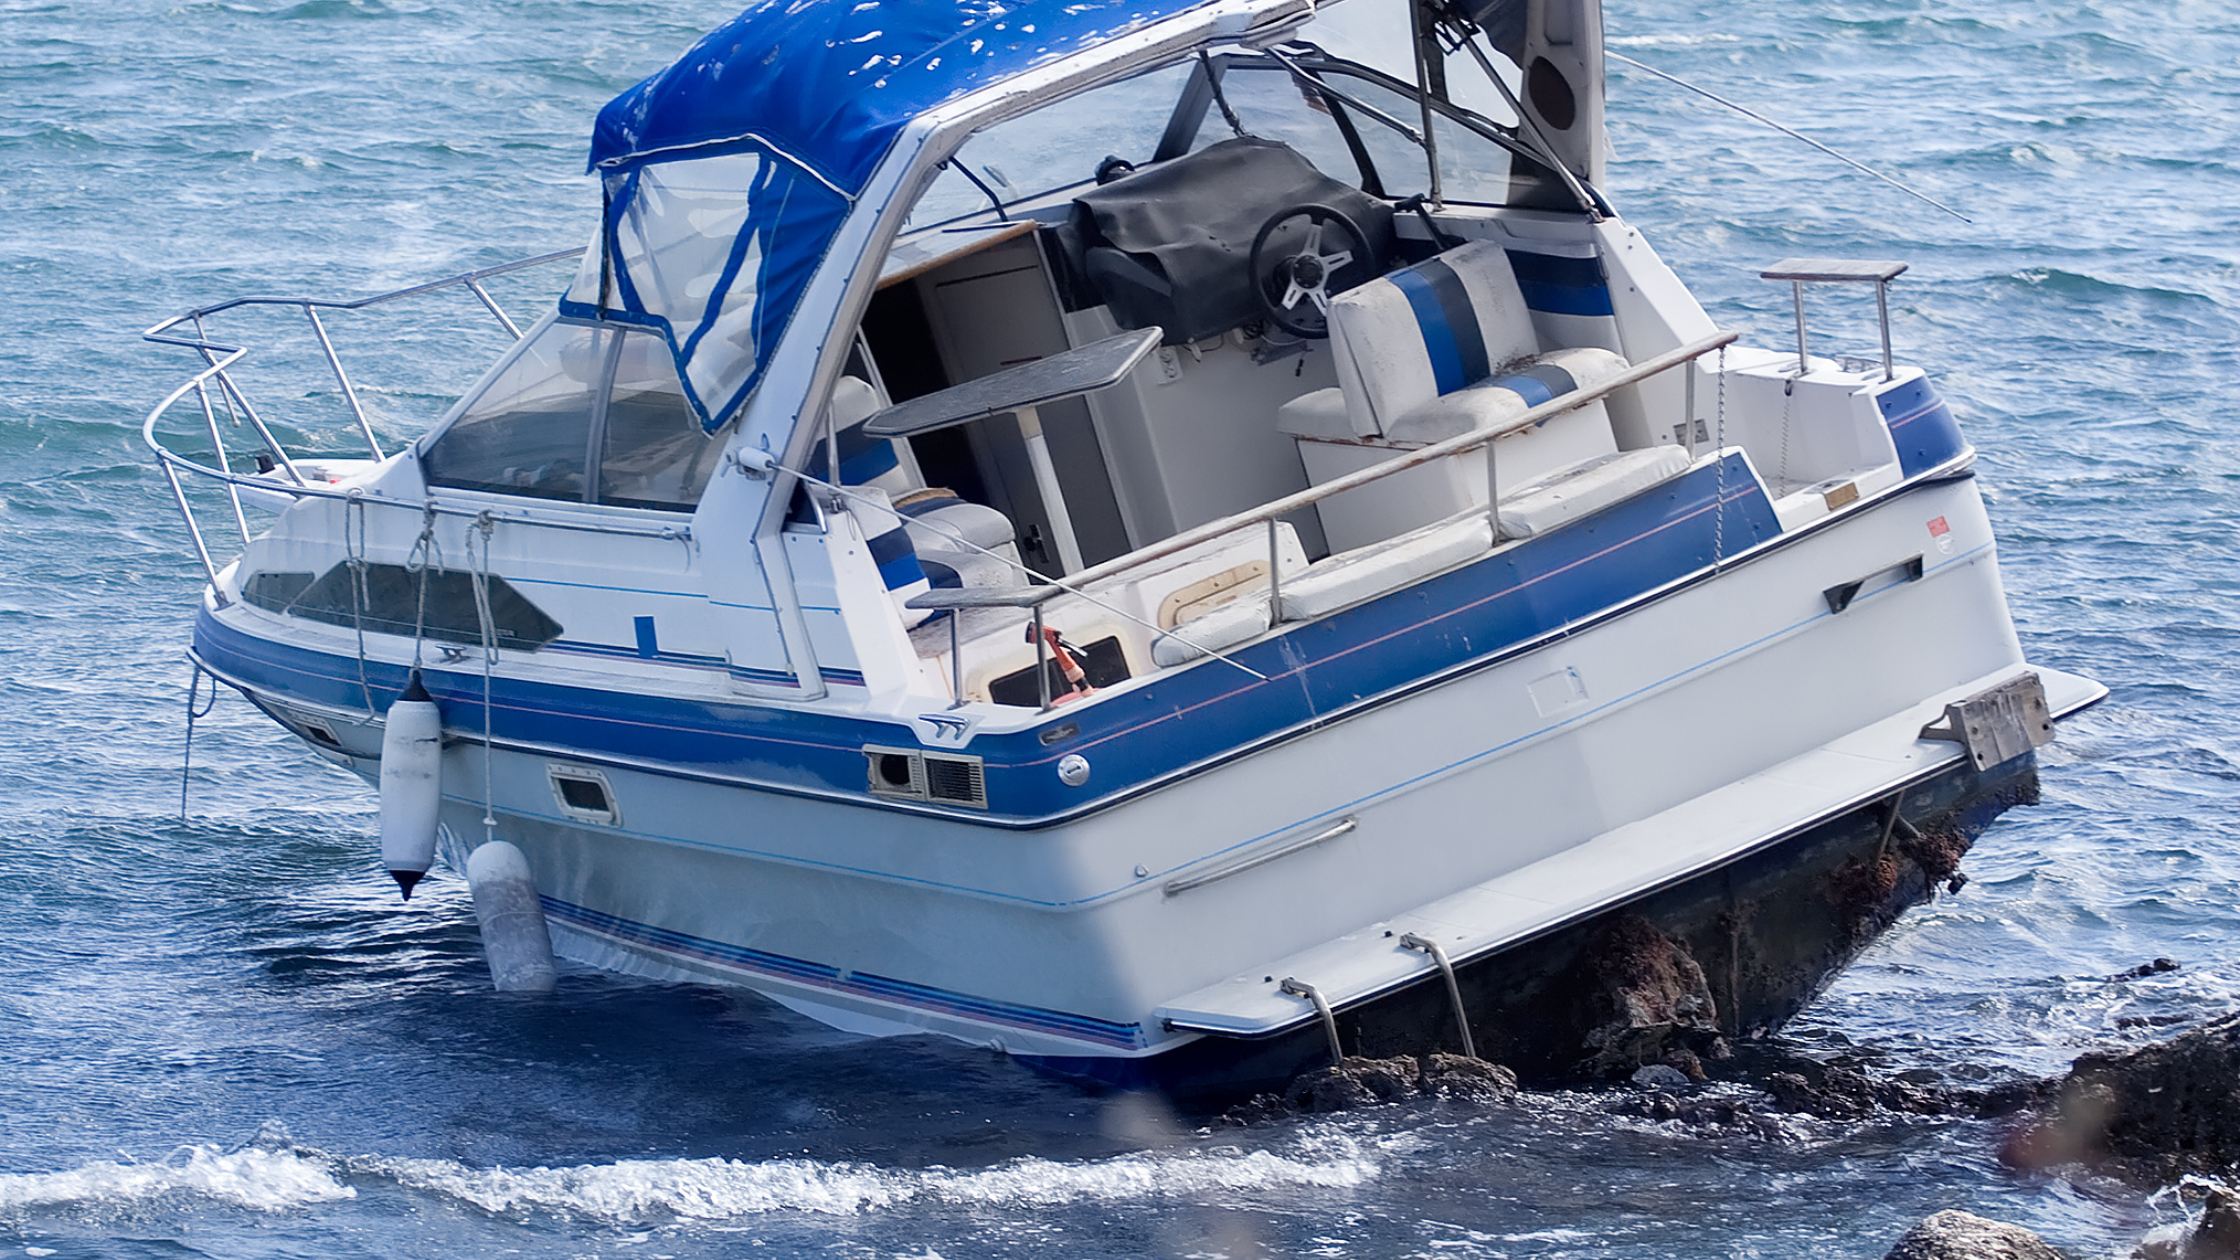 Boat Accident Lawyer In Moreno Valley, CA